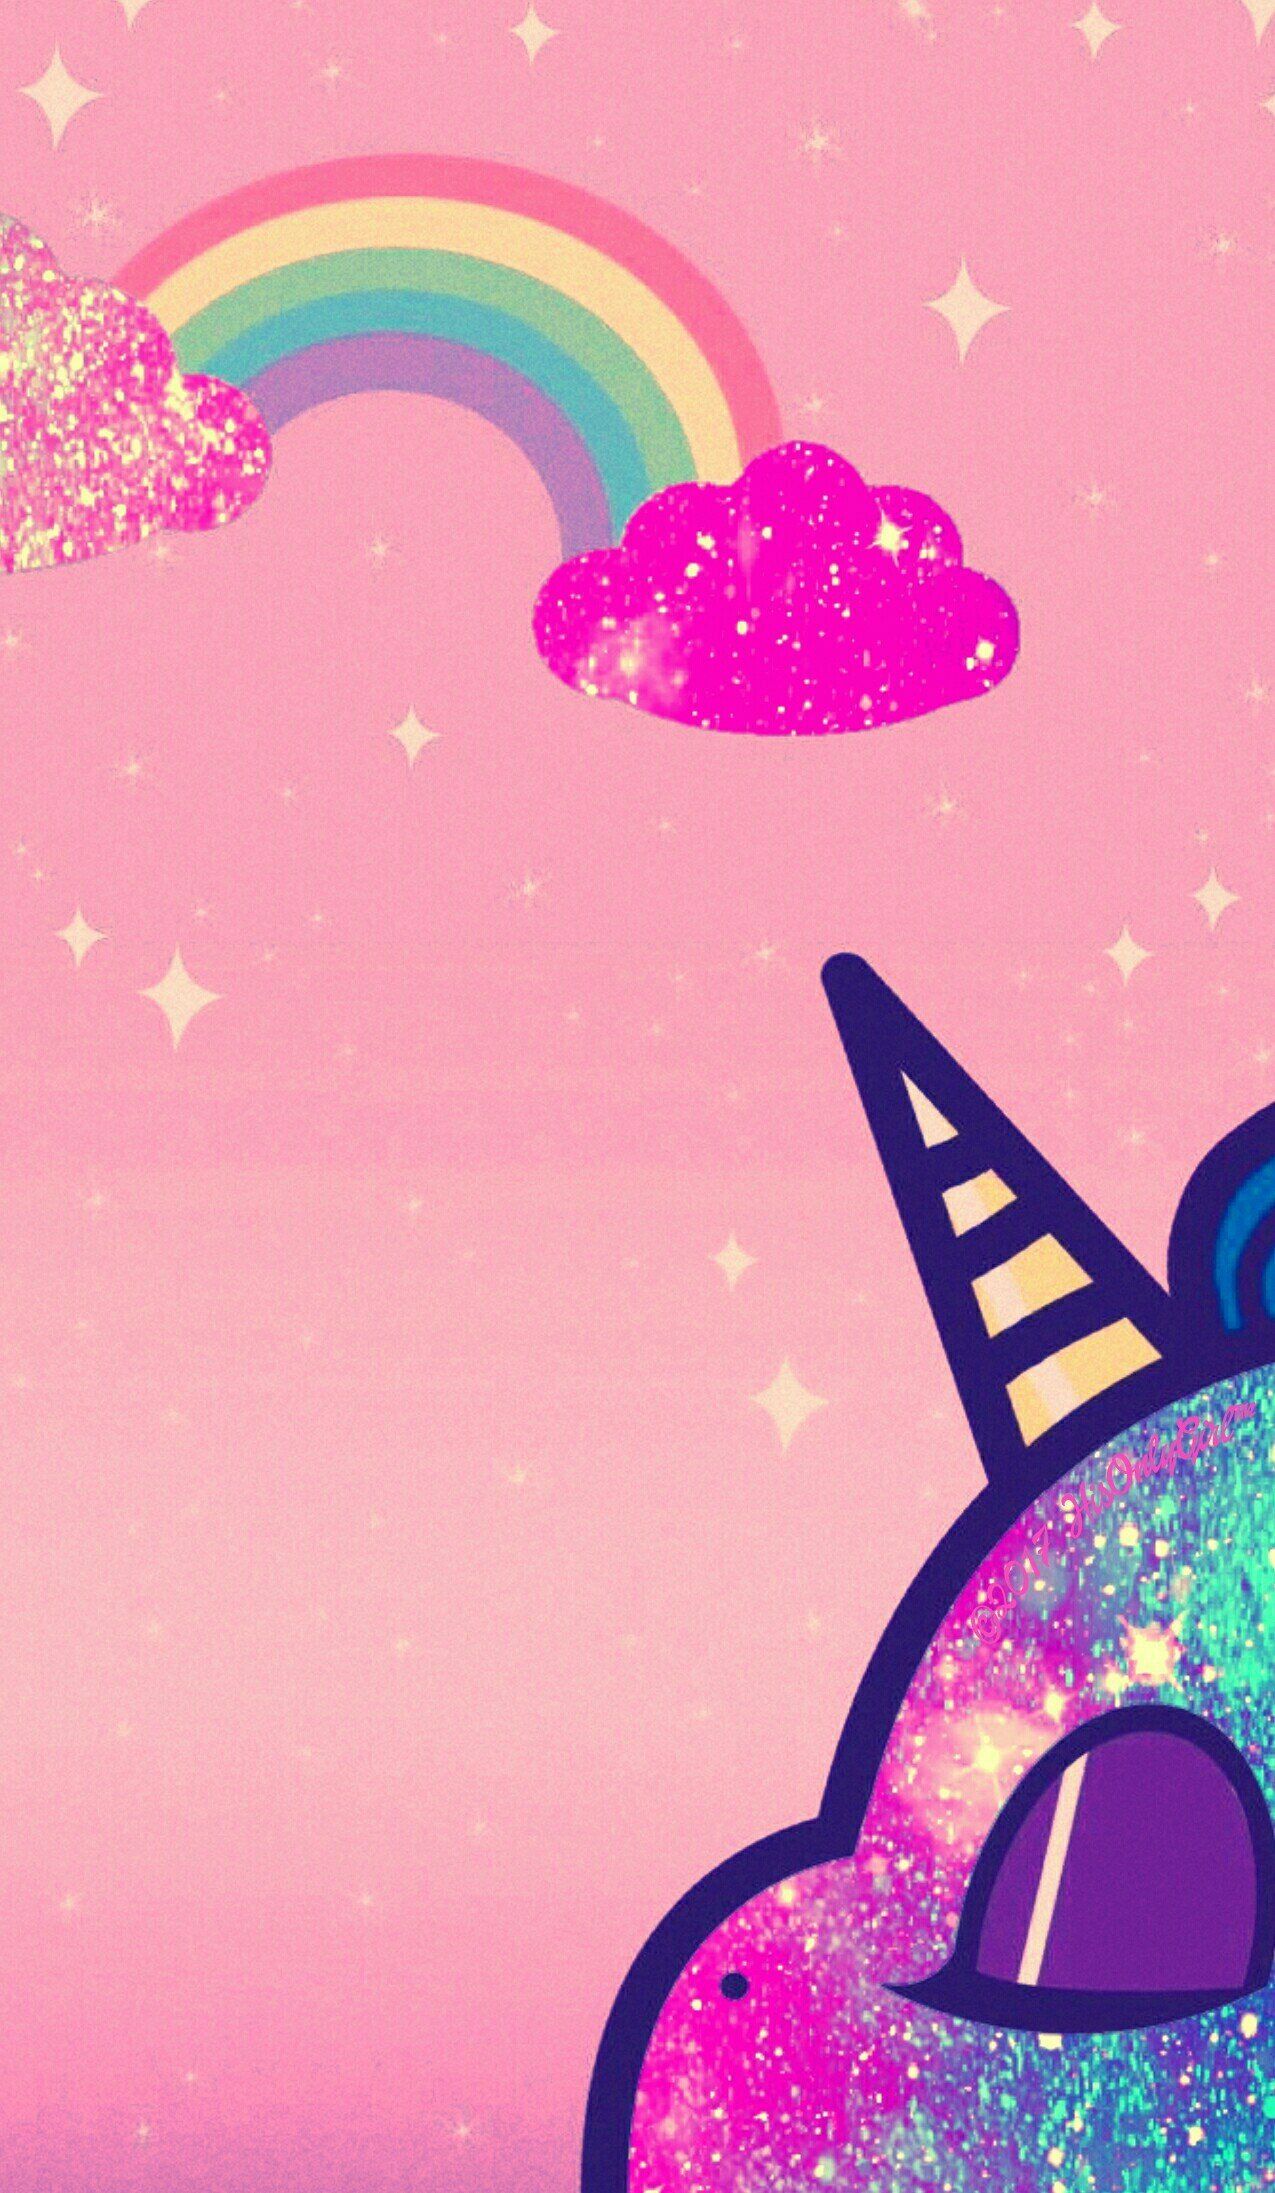 Galaxy Unicorn wallpaper by NikkiFrohloff  Download on ZEDGE  8d49